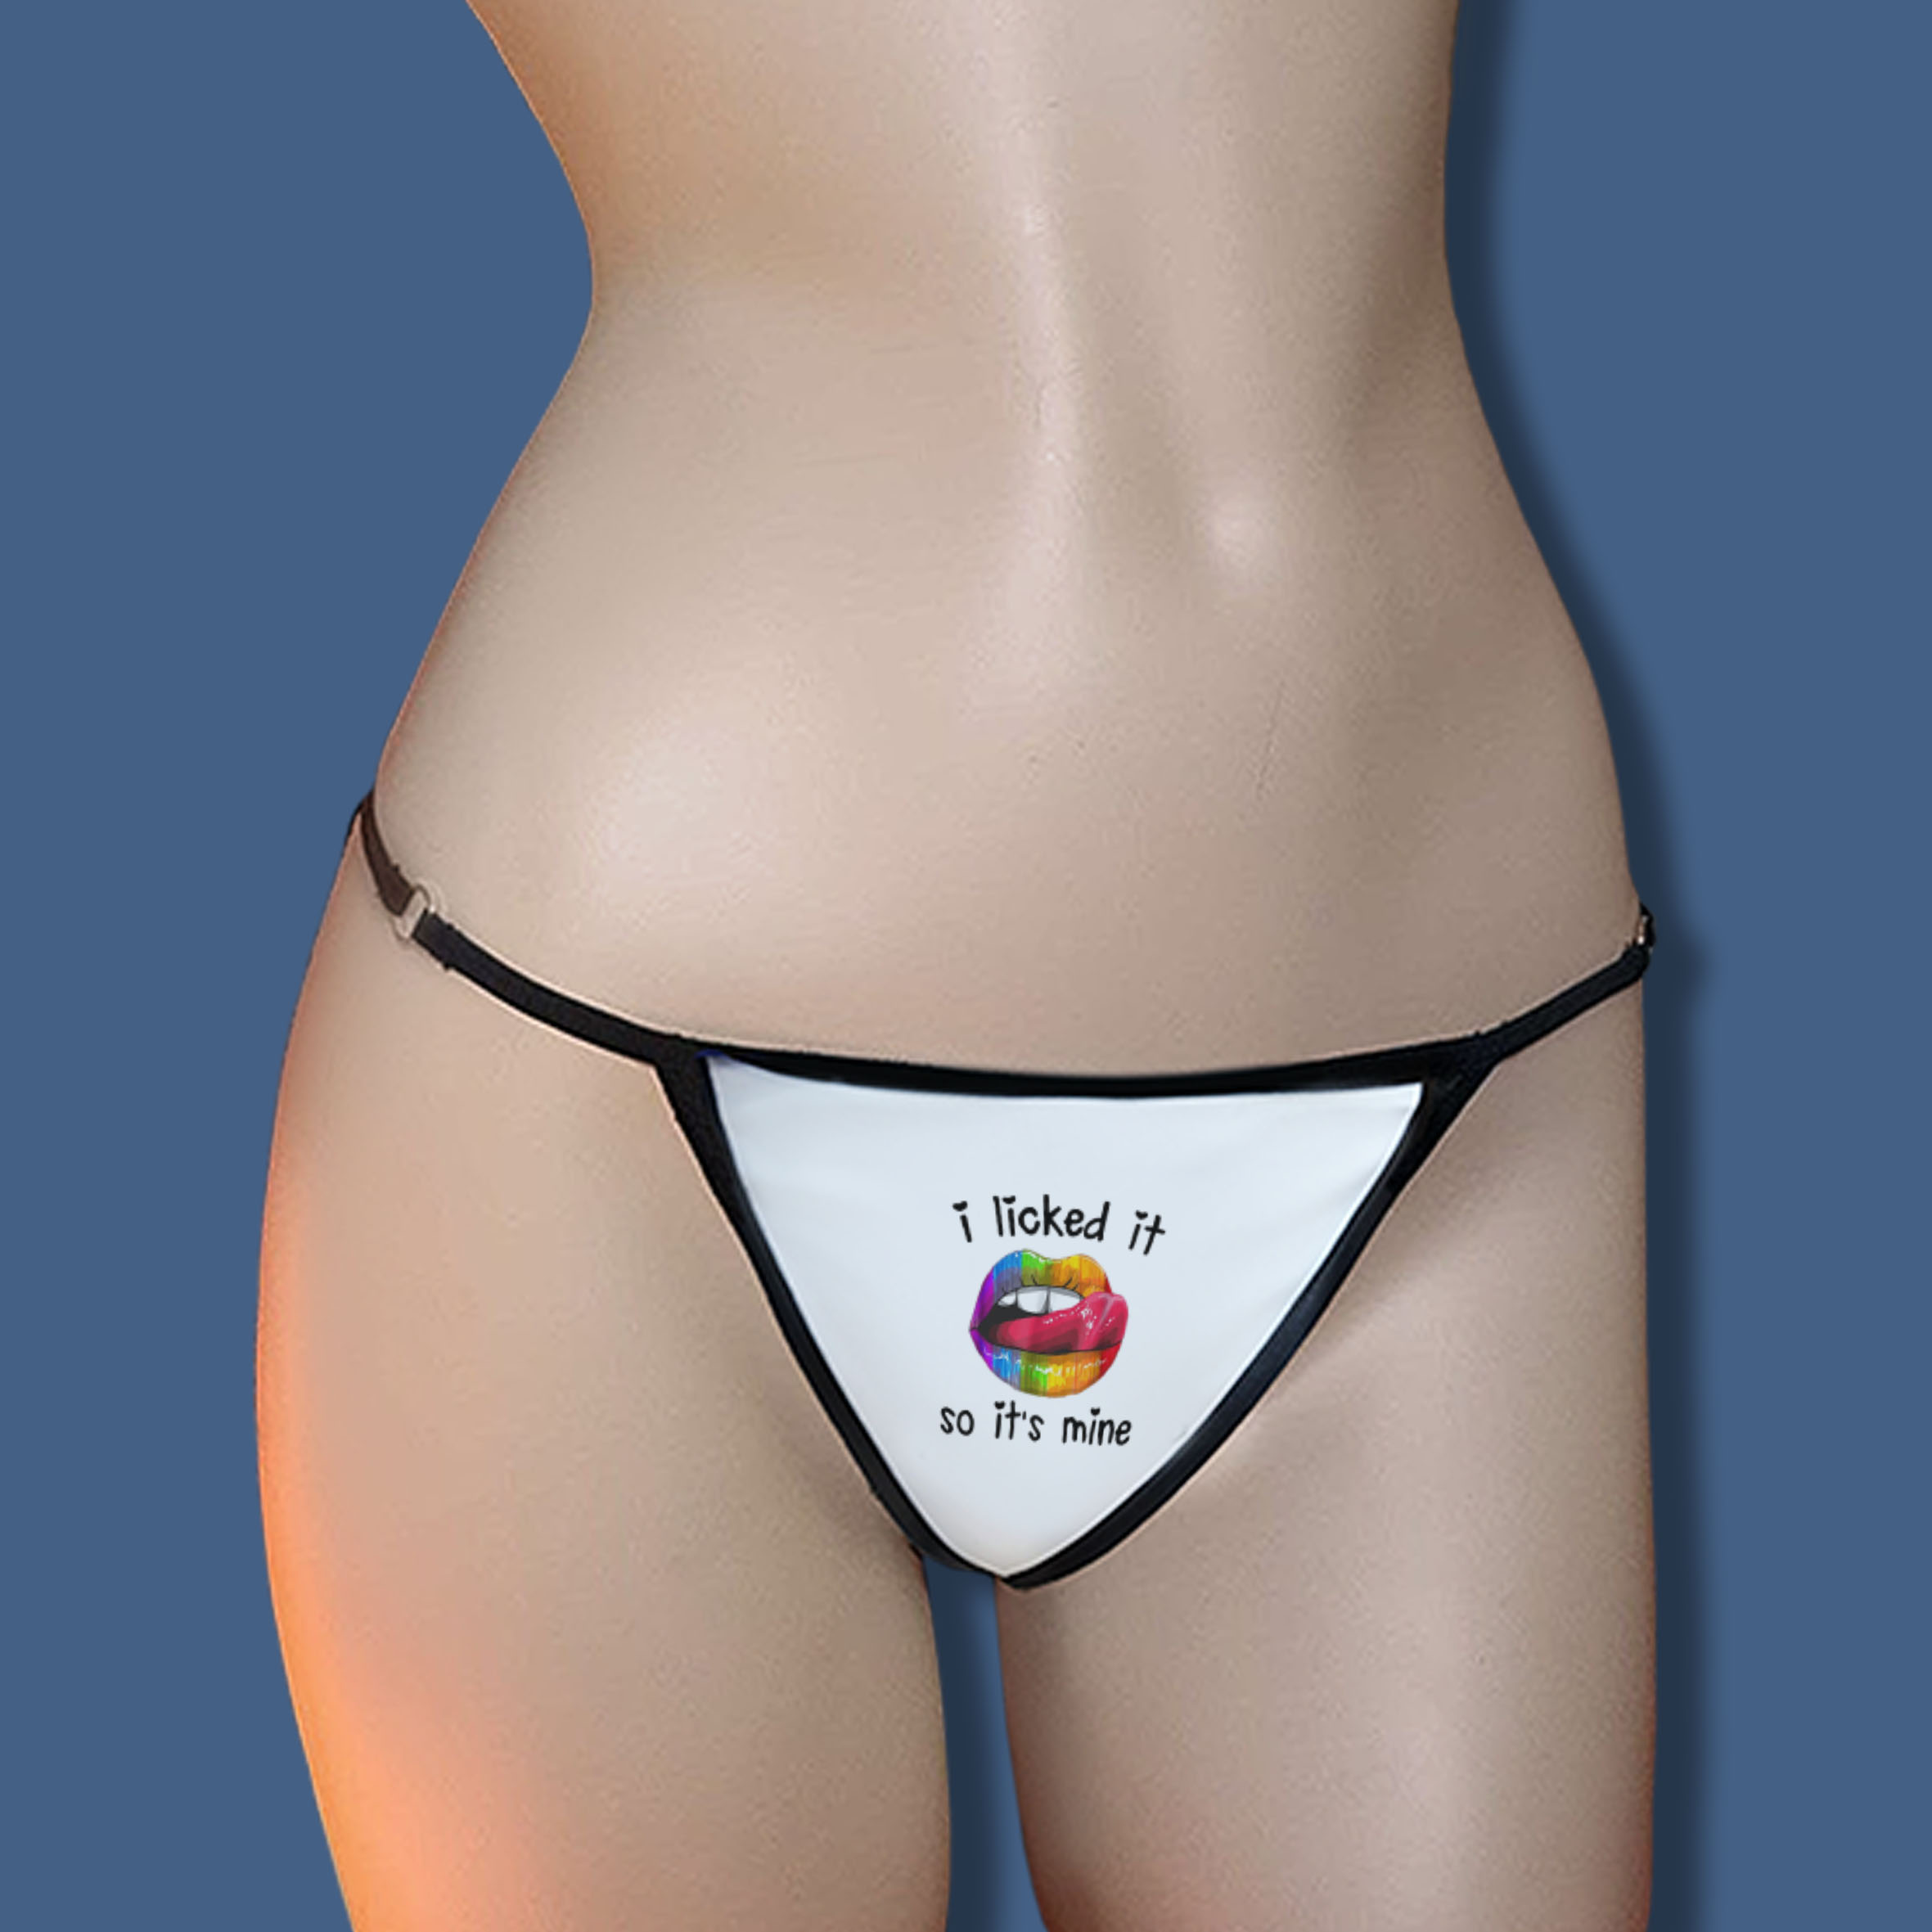 https://mainstreetgifts.ie/wp-content/uploads/sites/3/2022/02/Underwear-Licked-it-so-its-mine-F.jpg